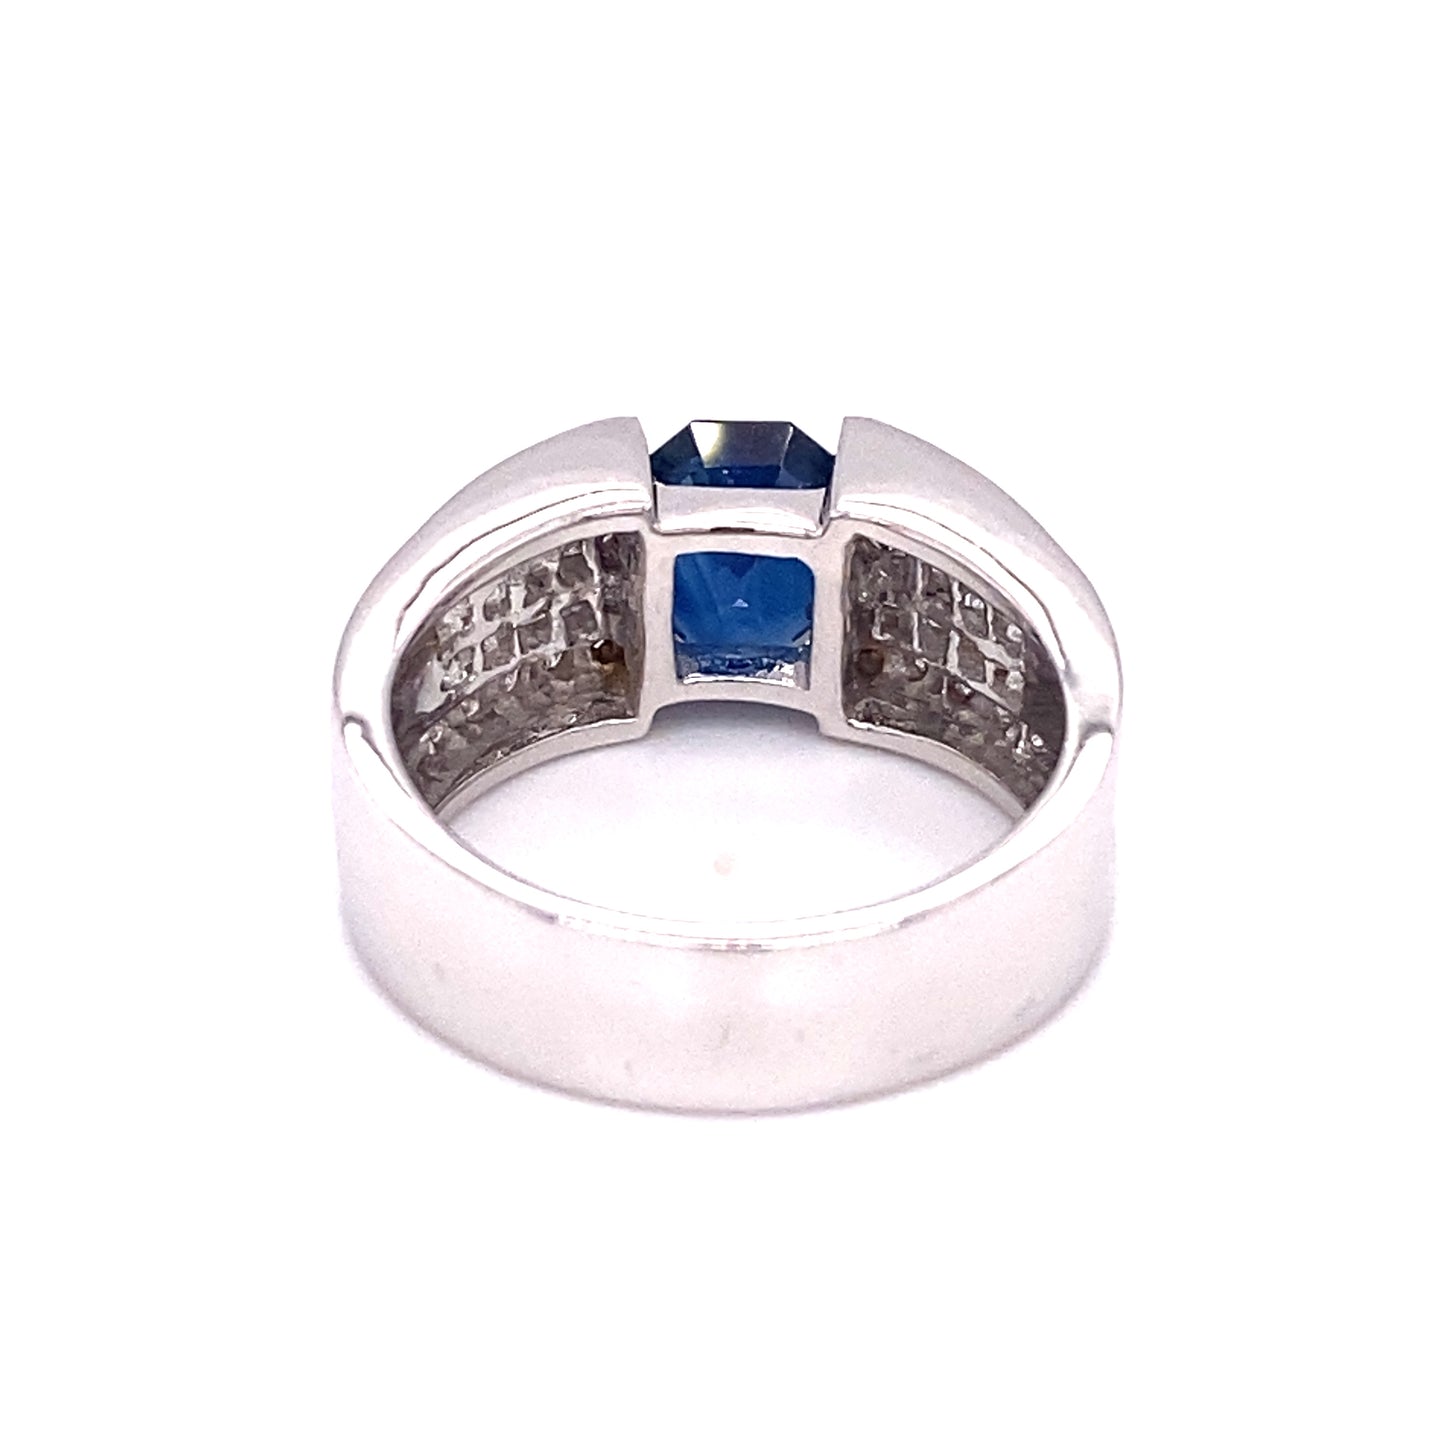 LE VIAN 1.10ct Sapphire and Diamond Tension Set Ring in 18K White Gold